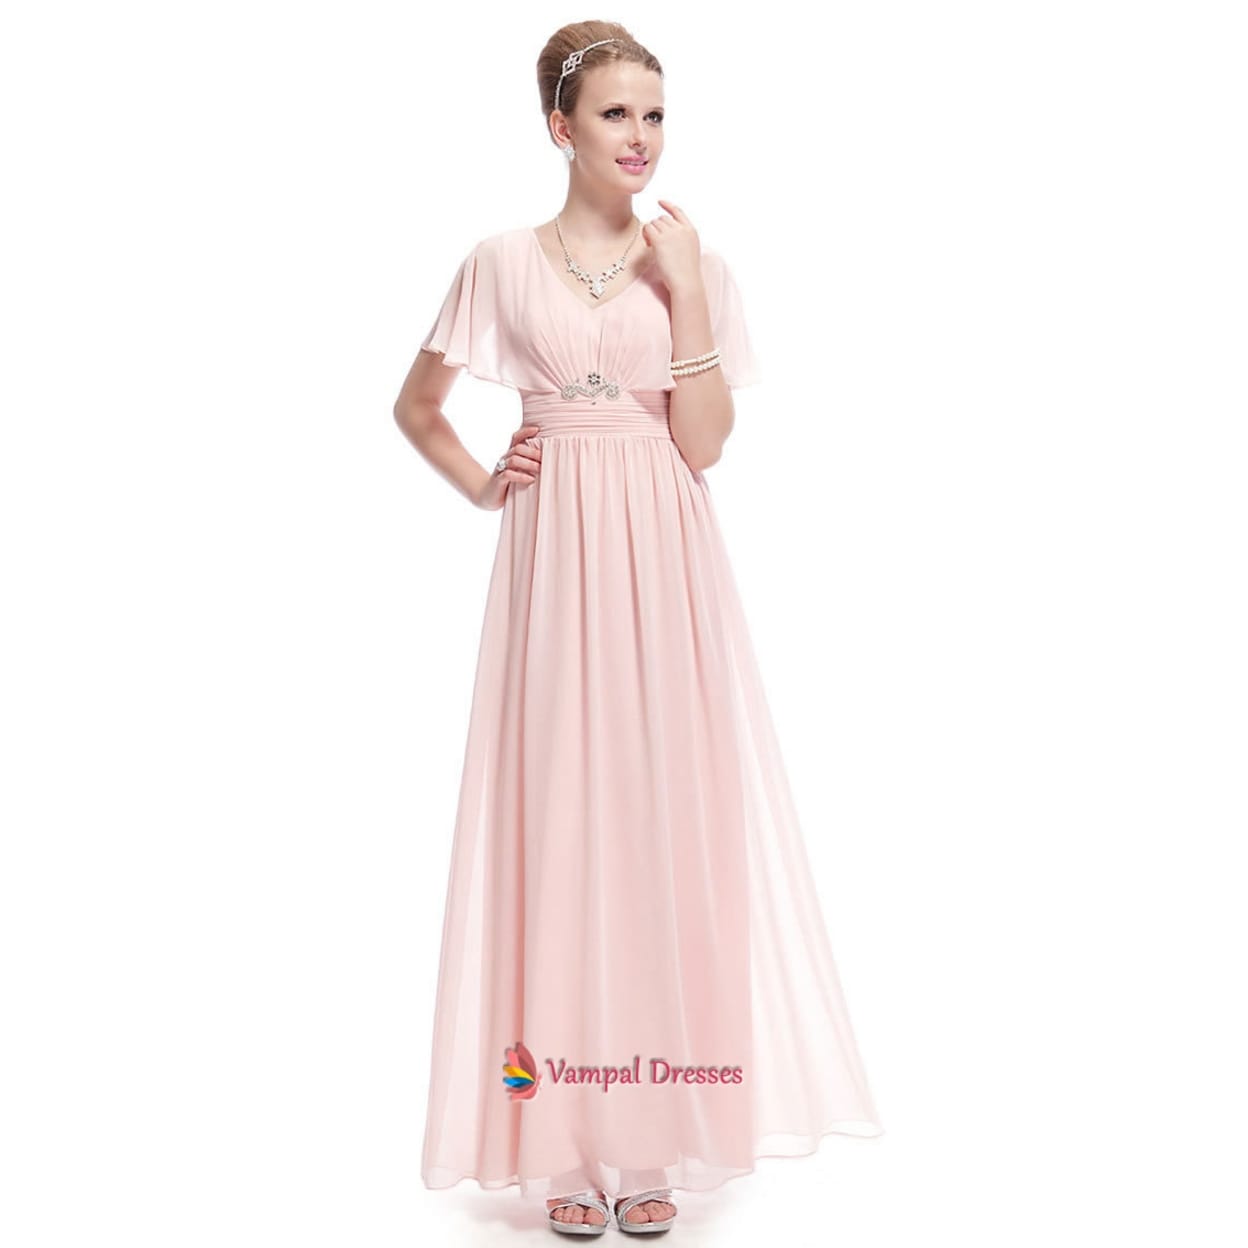 blush mother of the bride dresses